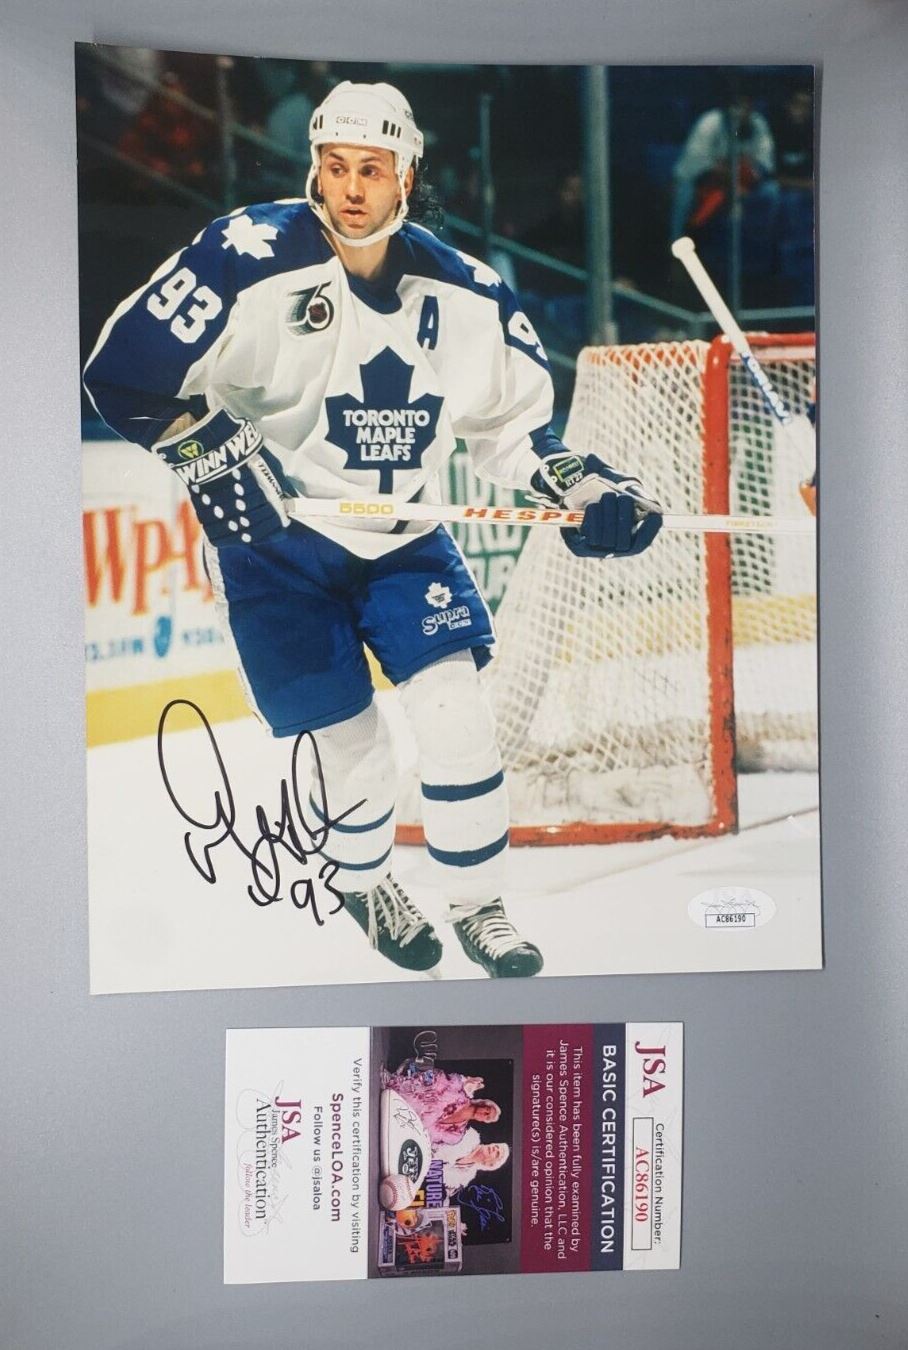 Hockey Player Doug Gilmour Autographed Photograph Signed - JSA Certified